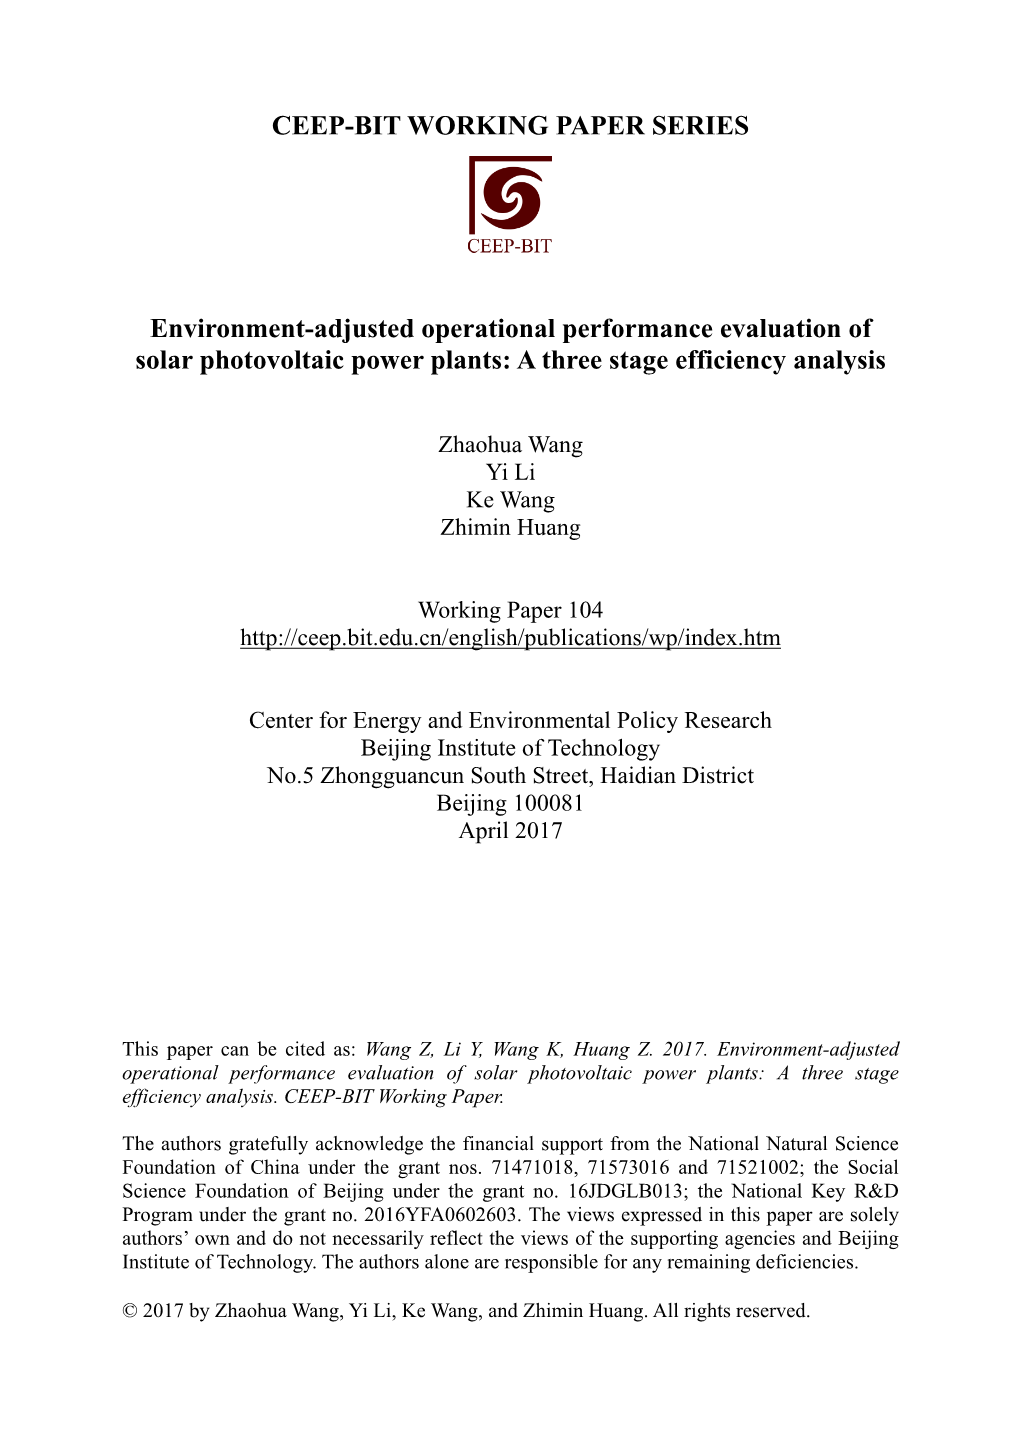 CEEP-BIT WORKING PAPER SERIES Environment-Adjusted Operational